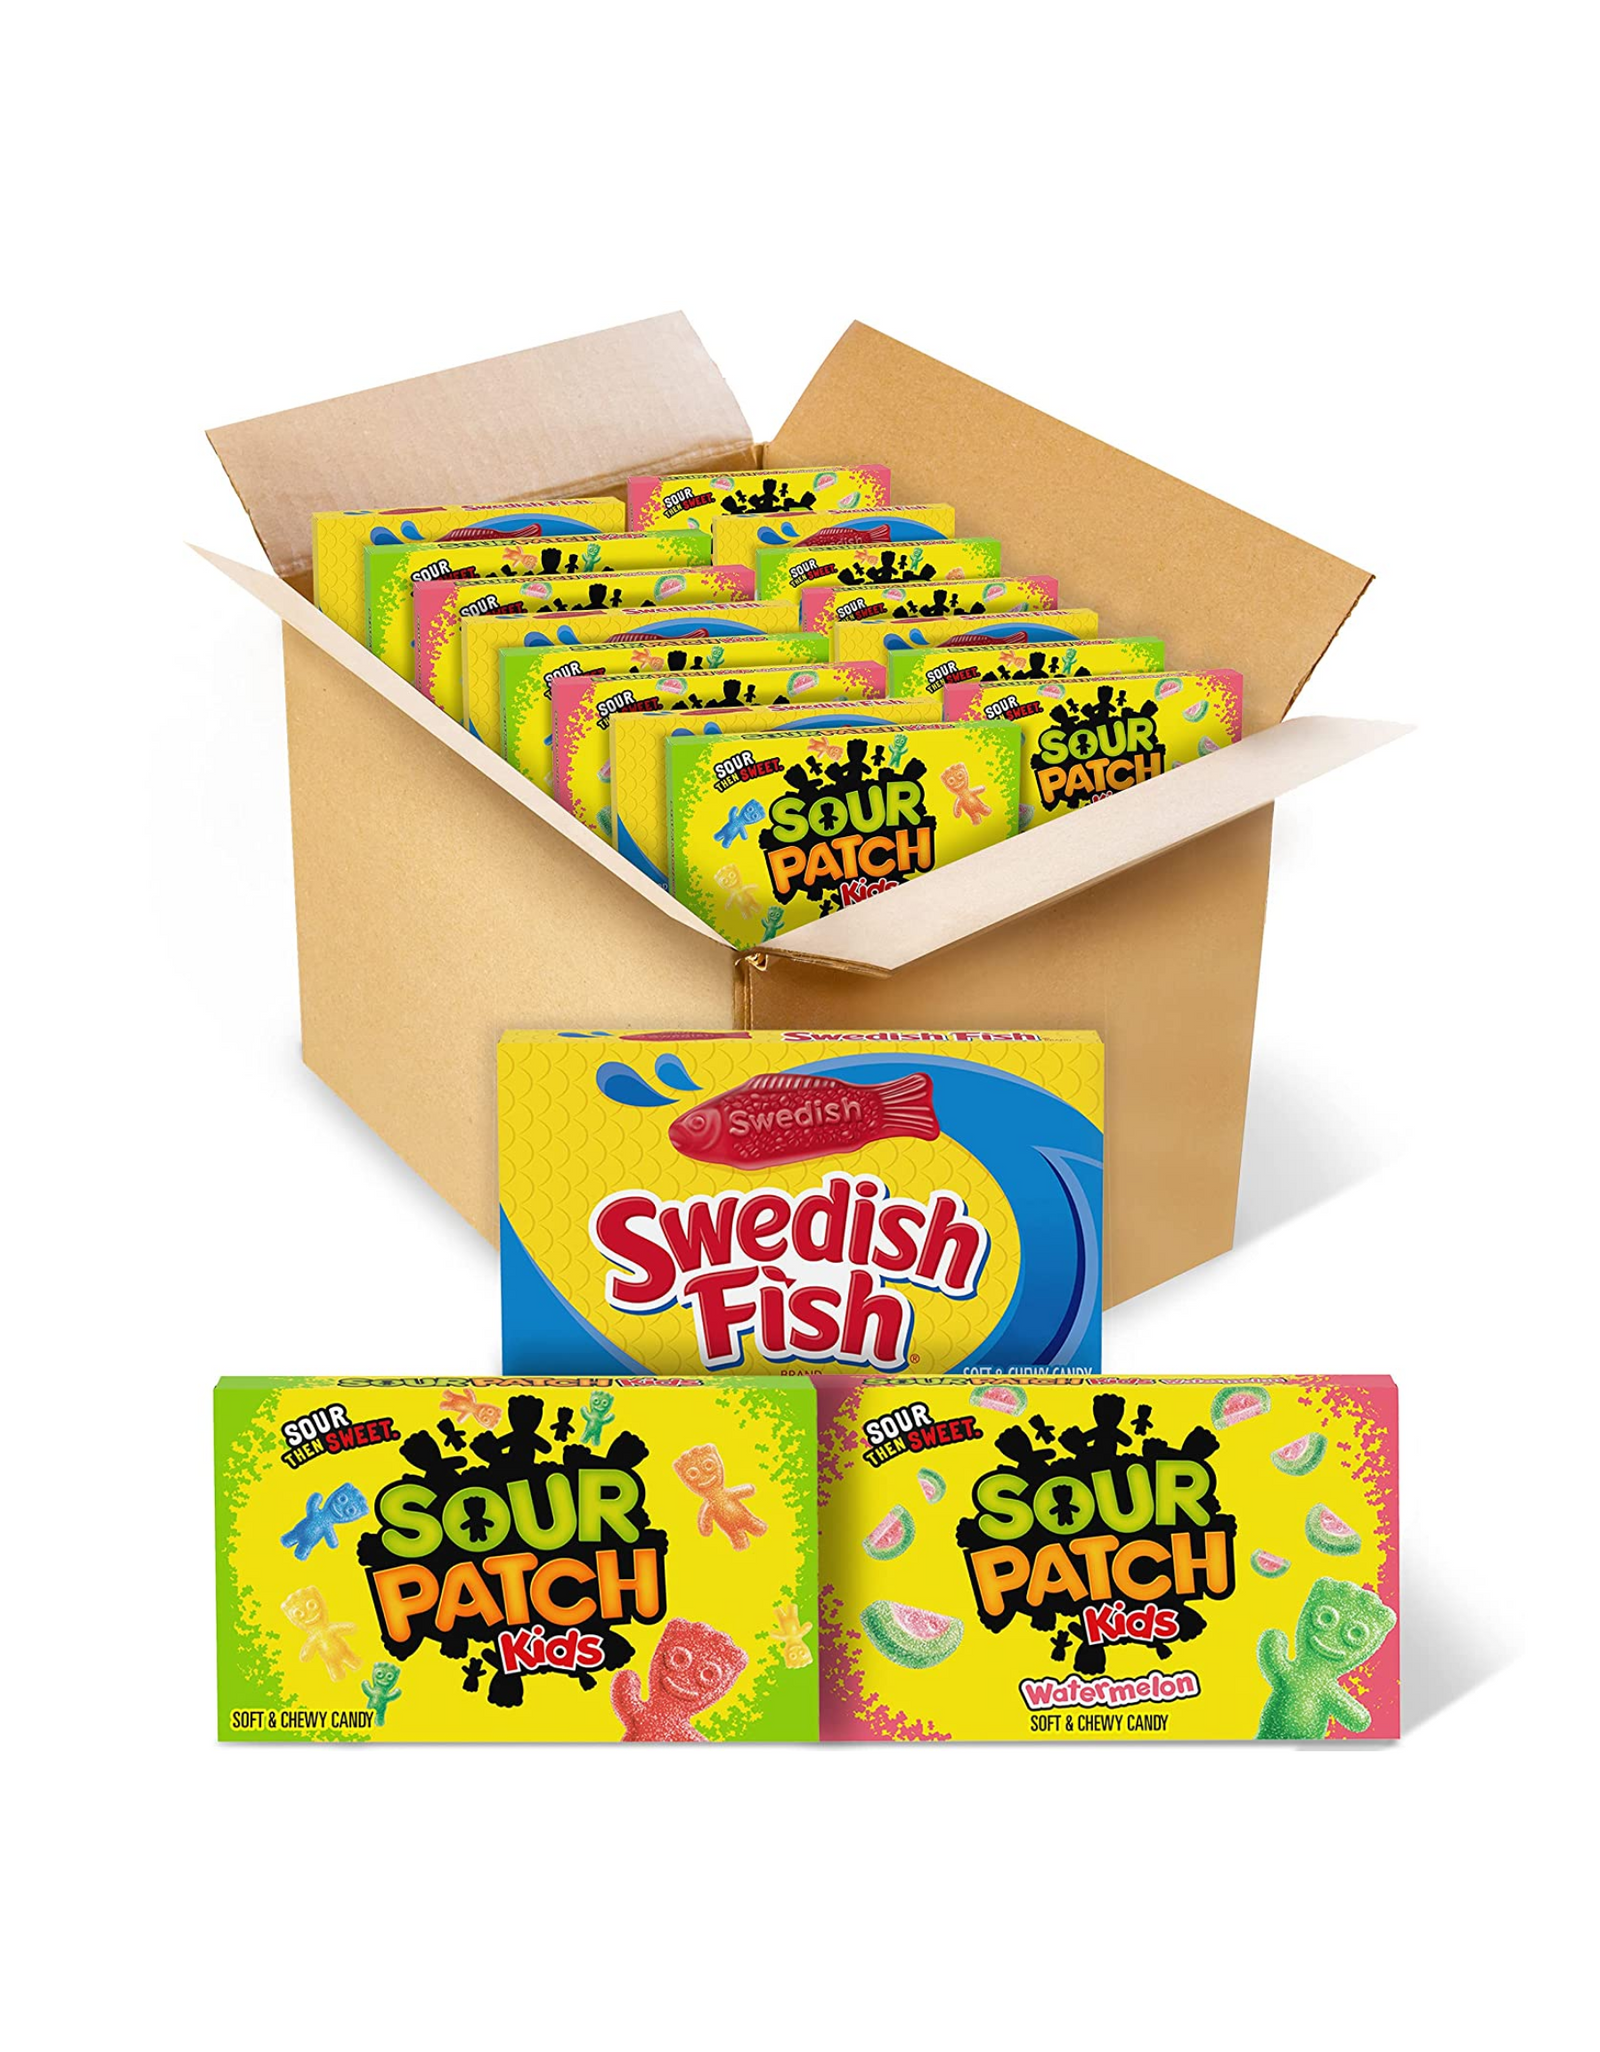 SOUR PATCH KIDS Original Candy, SOUR PATCH KIDS Watermelon Candy & SWEDISH FISH Candy Variety Pack, 15 Movie Theater Candy Boxes